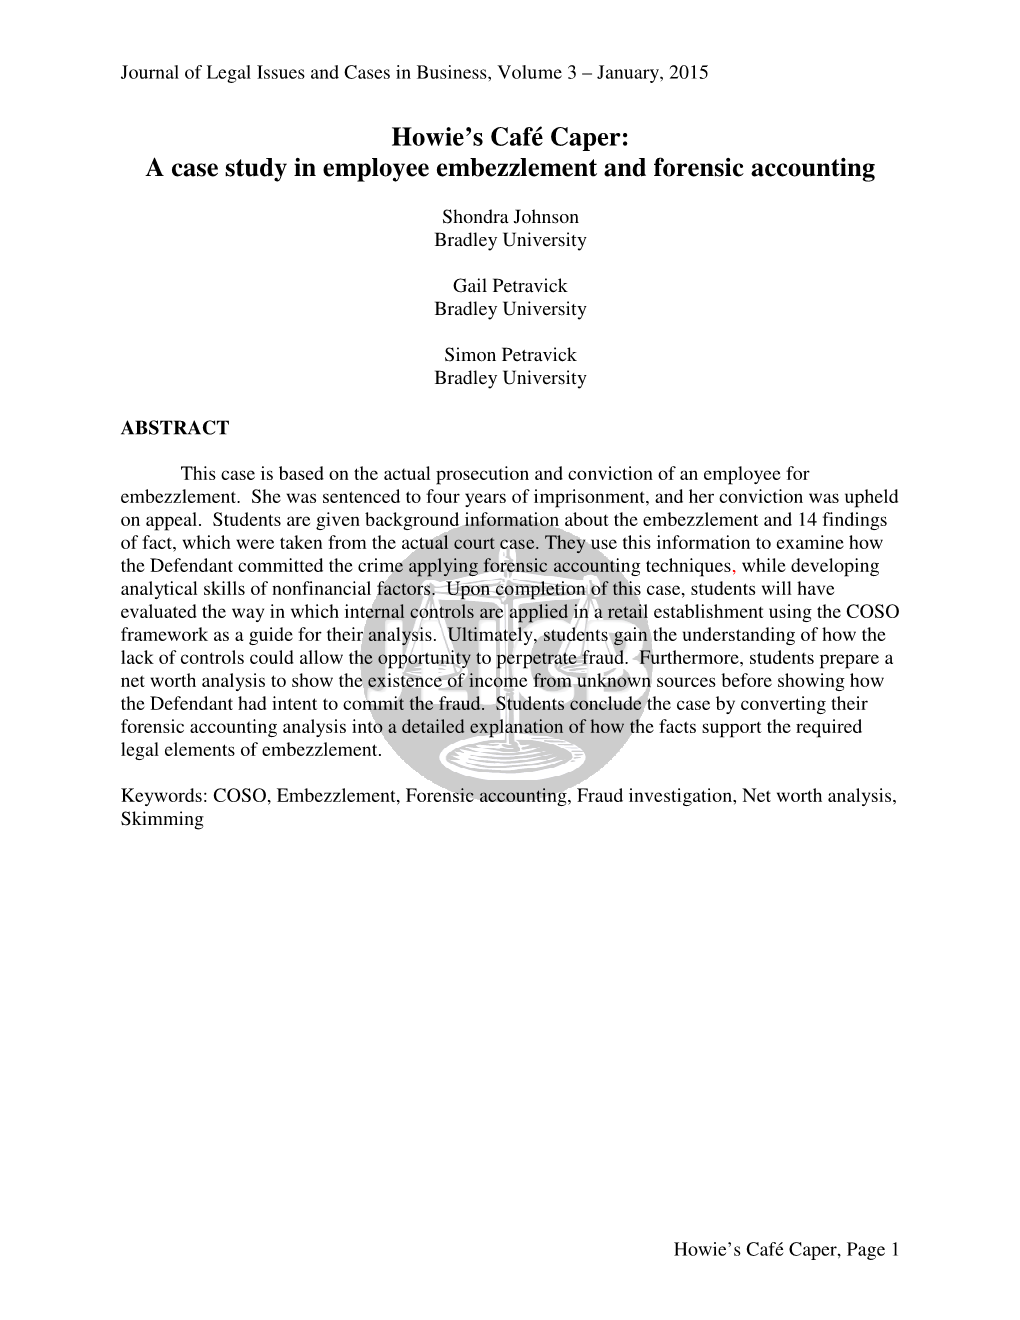 A Case Study in Employee Embezzlement and Forensic Accounting